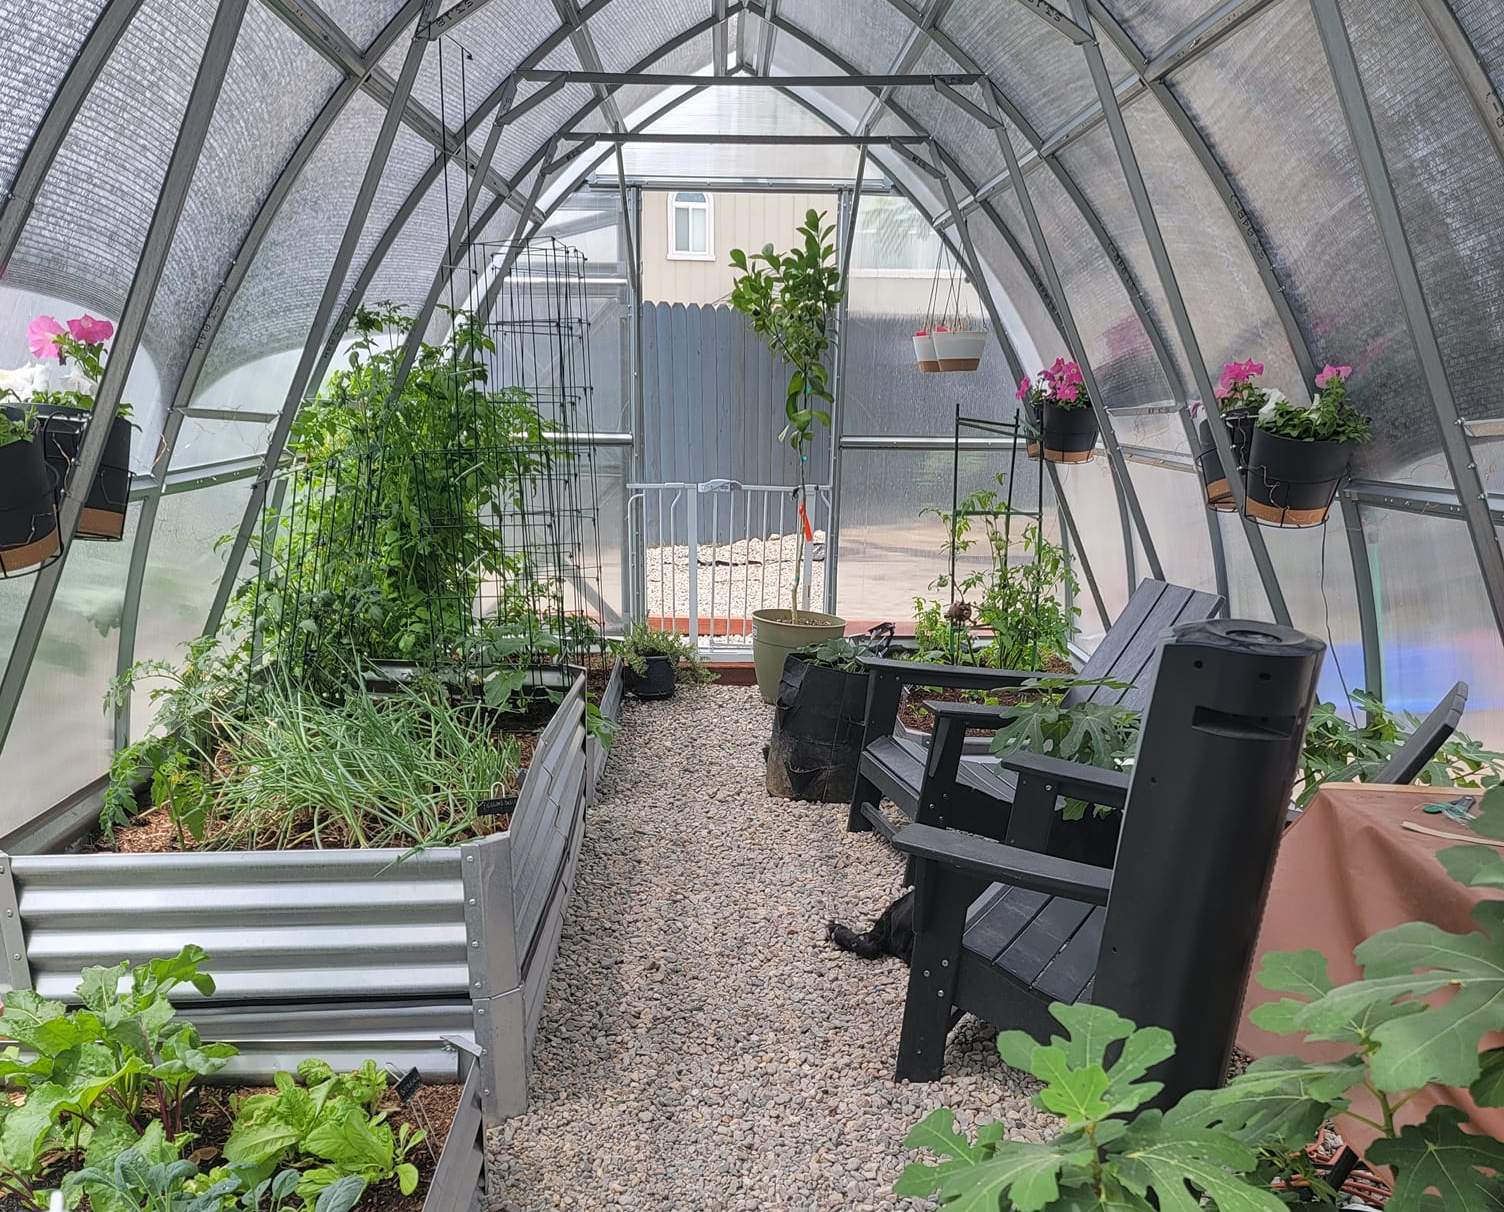 an image of the interior of a high tunnel greenhouse with pebble flooring